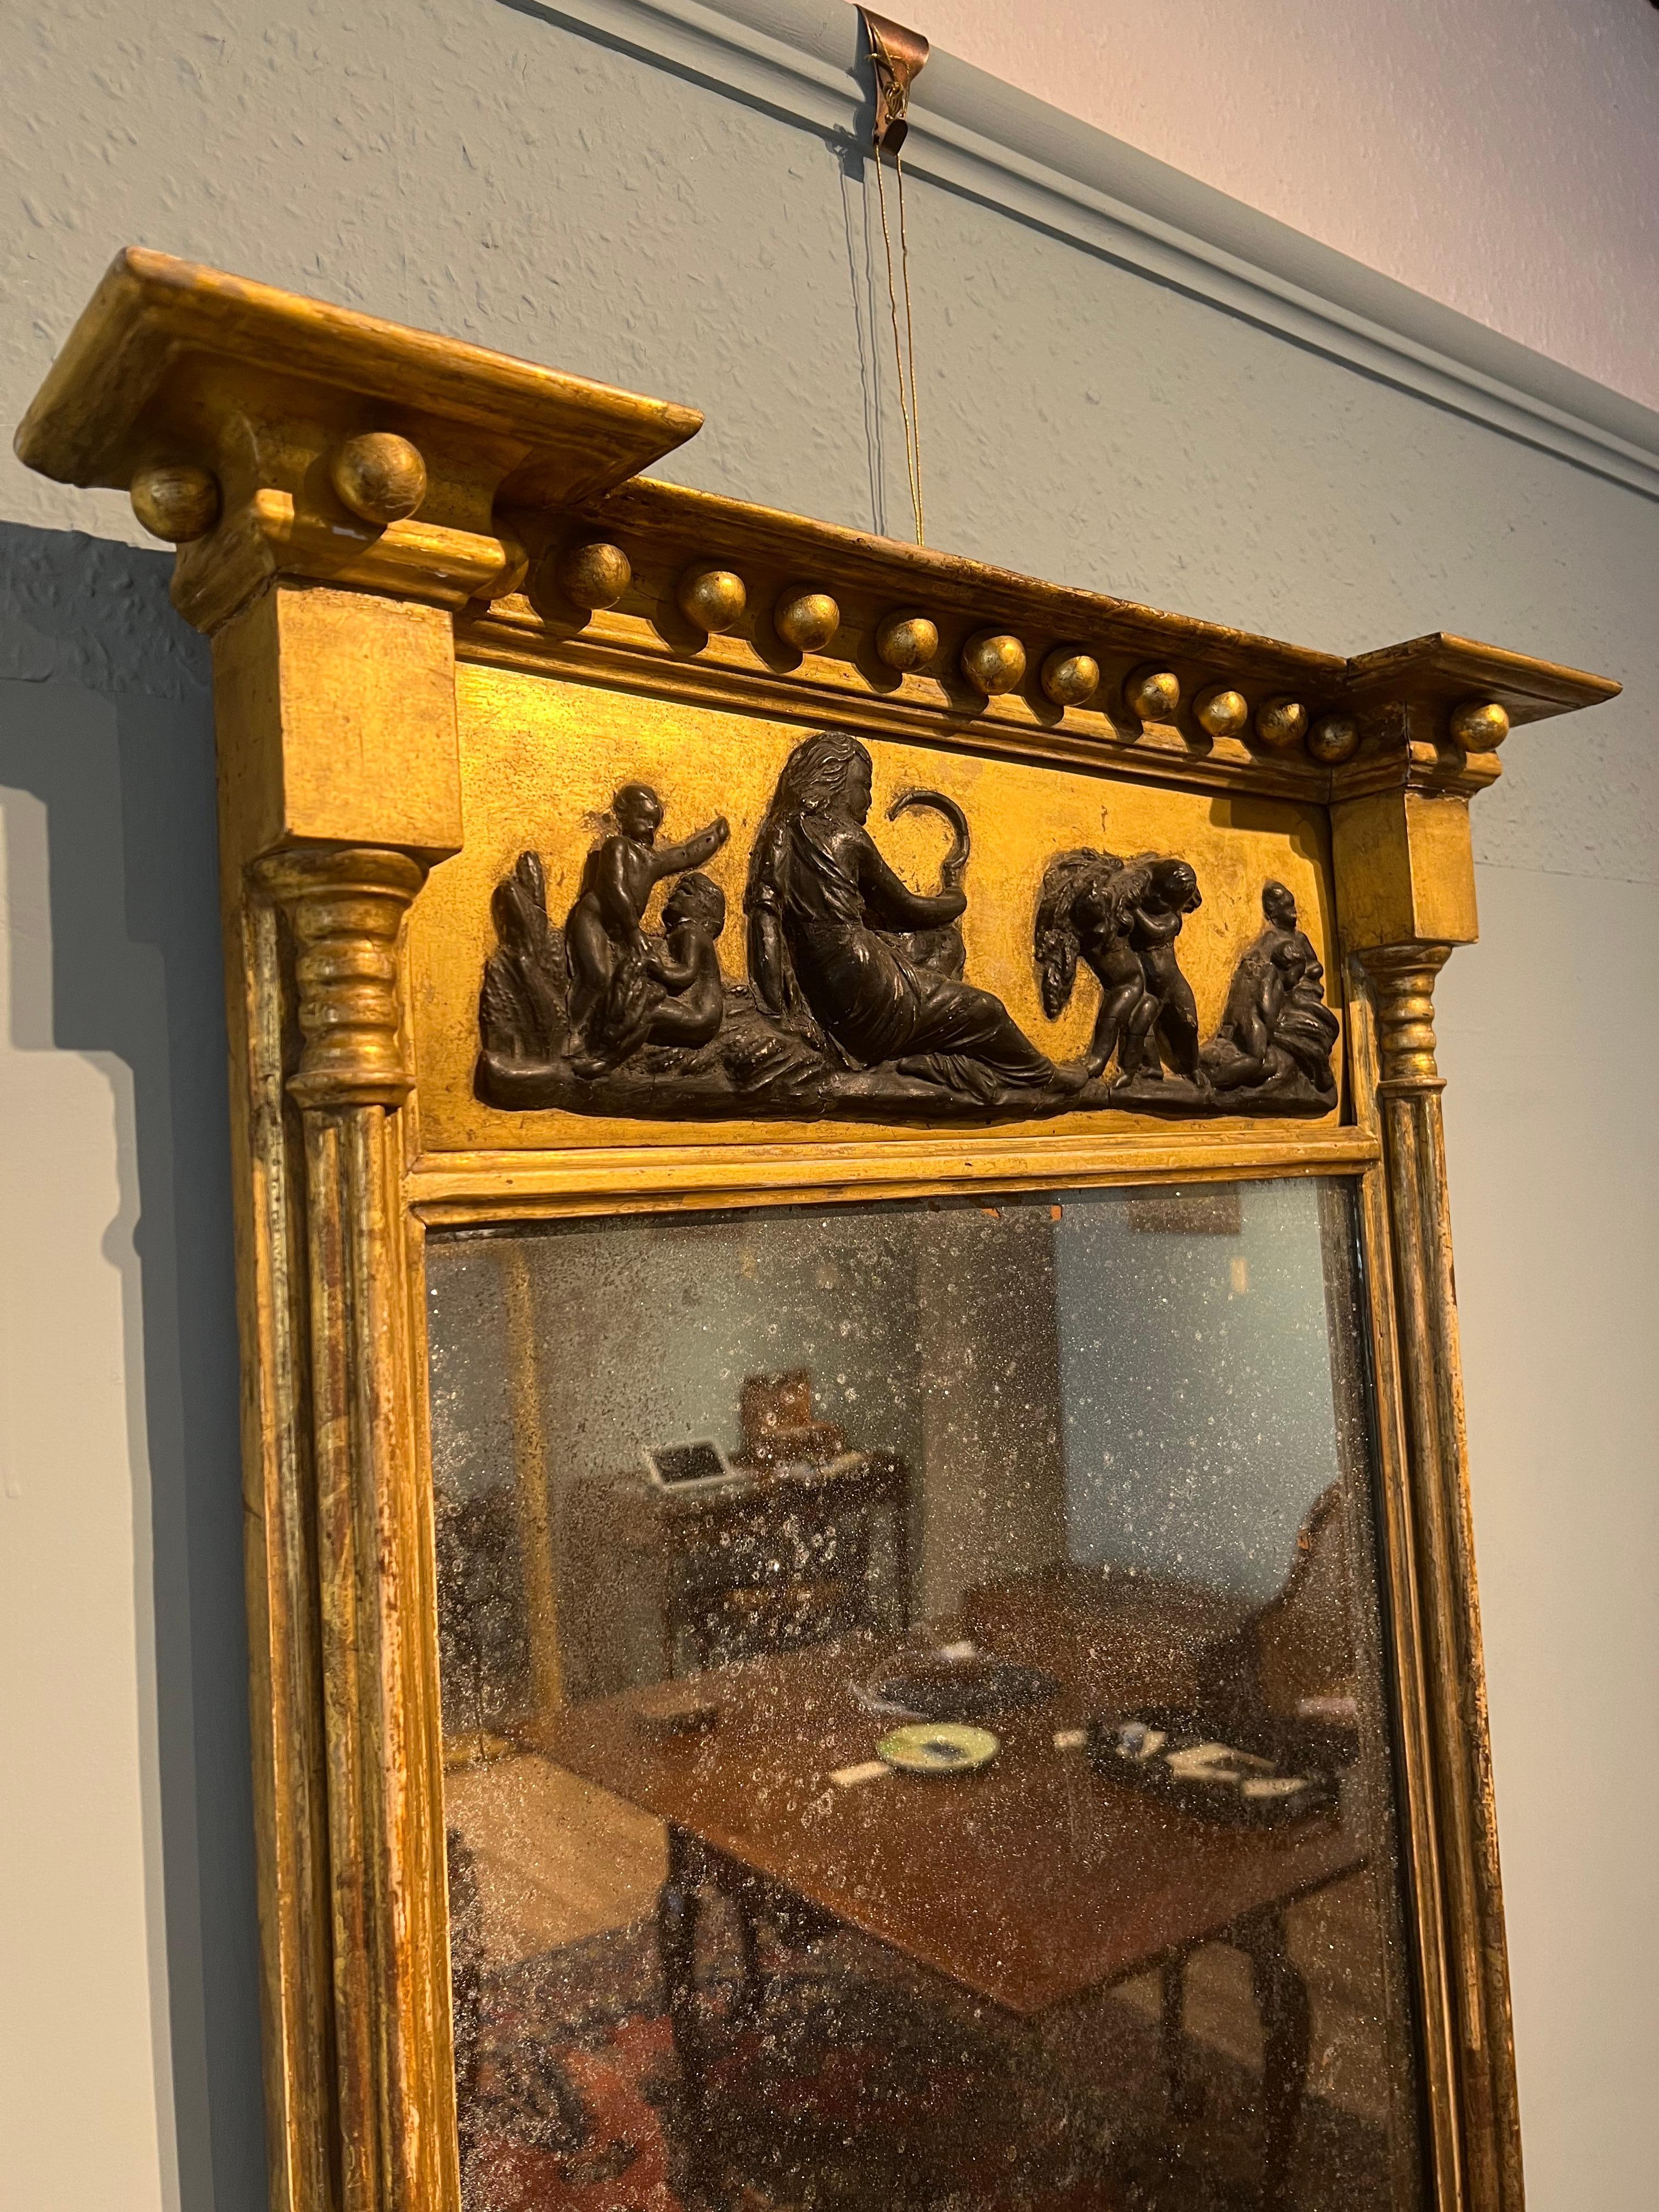 Fine Regency period gilt pier mirror, in untouched original condition. This lovely rectangular pier mirror has ball decoration to the cornice, below this there is an ebonized Greek harvest scene. Cluster column pillars are to the sides, with the